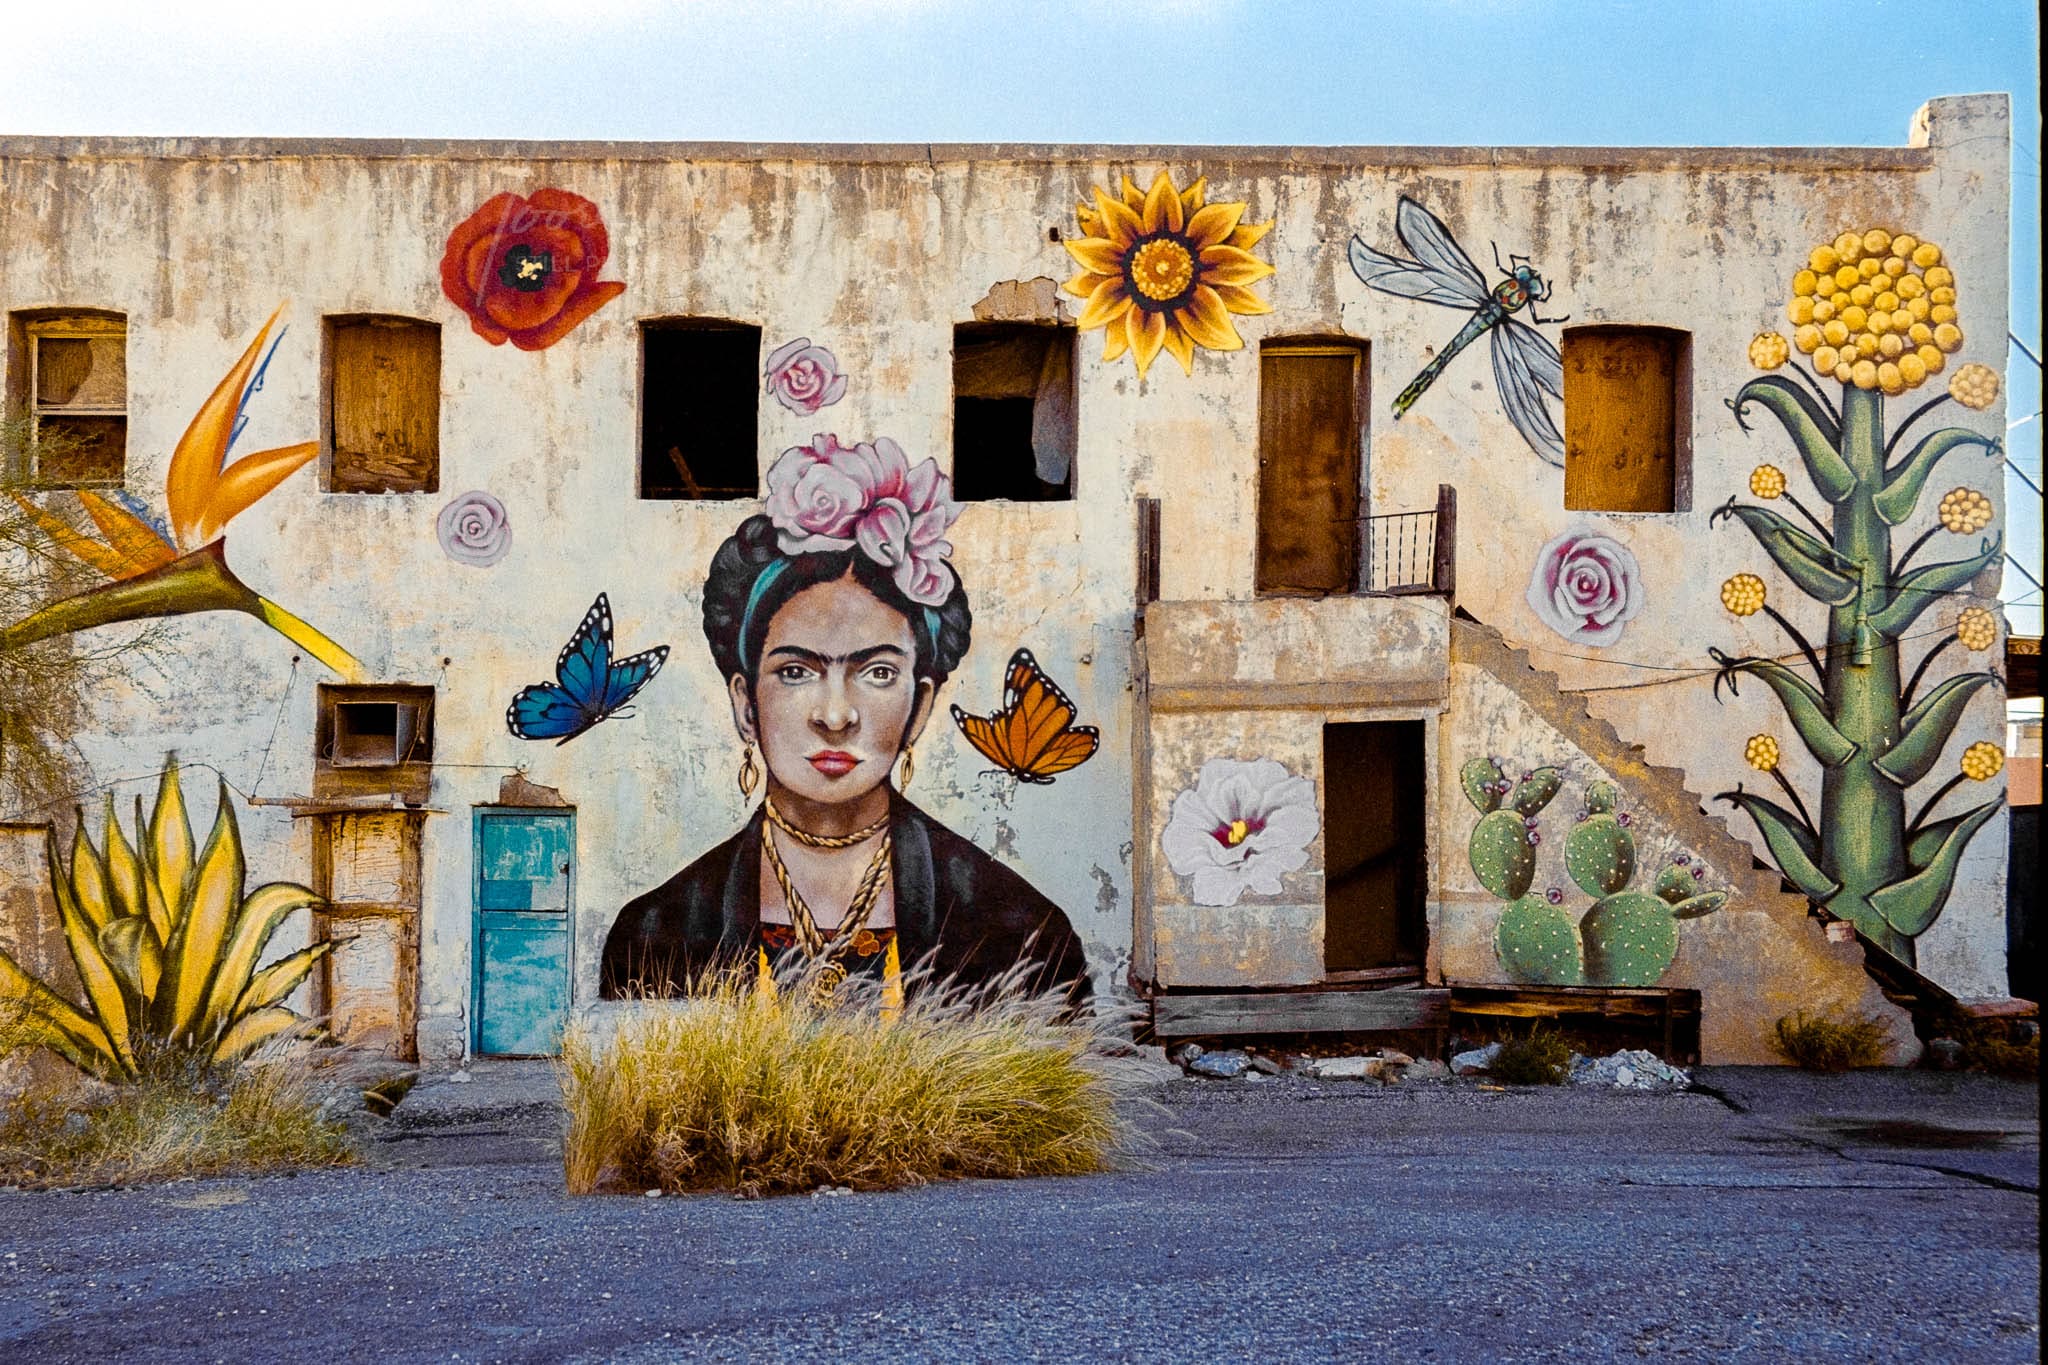 Vibrant mural of woman and botanicals revitalizing an abandoned building in a desert landscape.